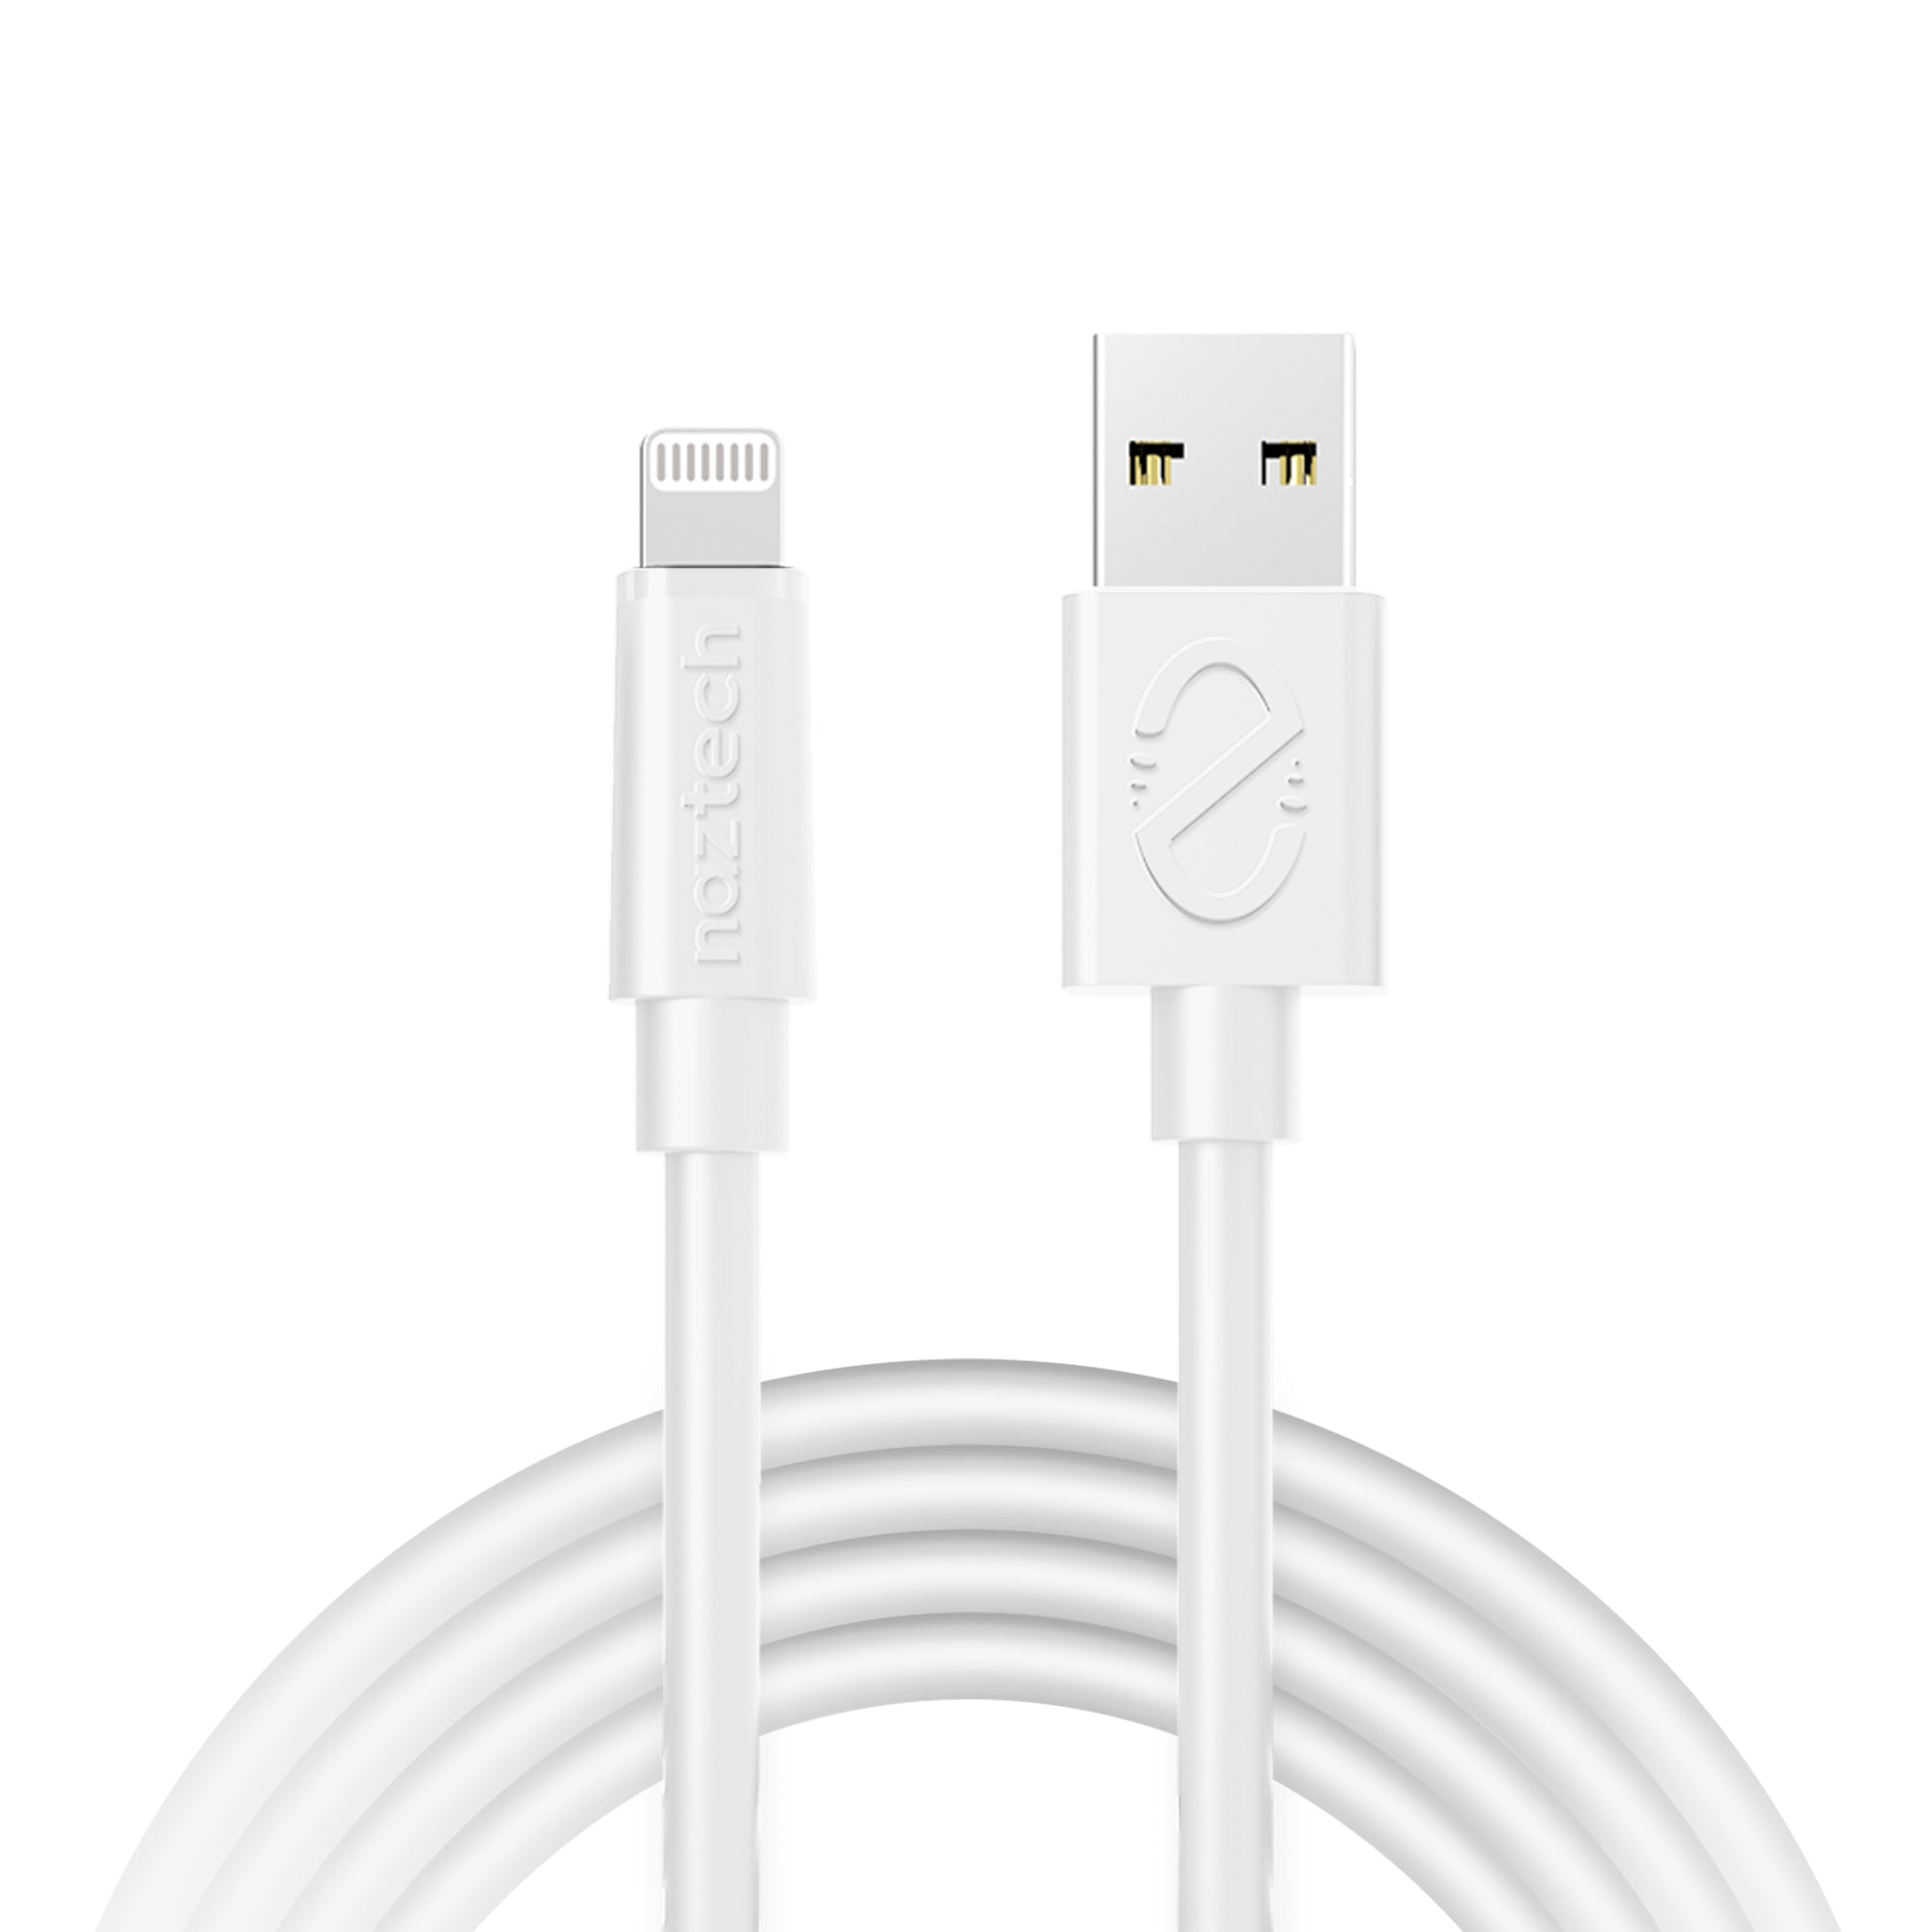 Lightning cable to 3.5mm jack and Lightning charging port for iPhone 7 by  ATOOL review 